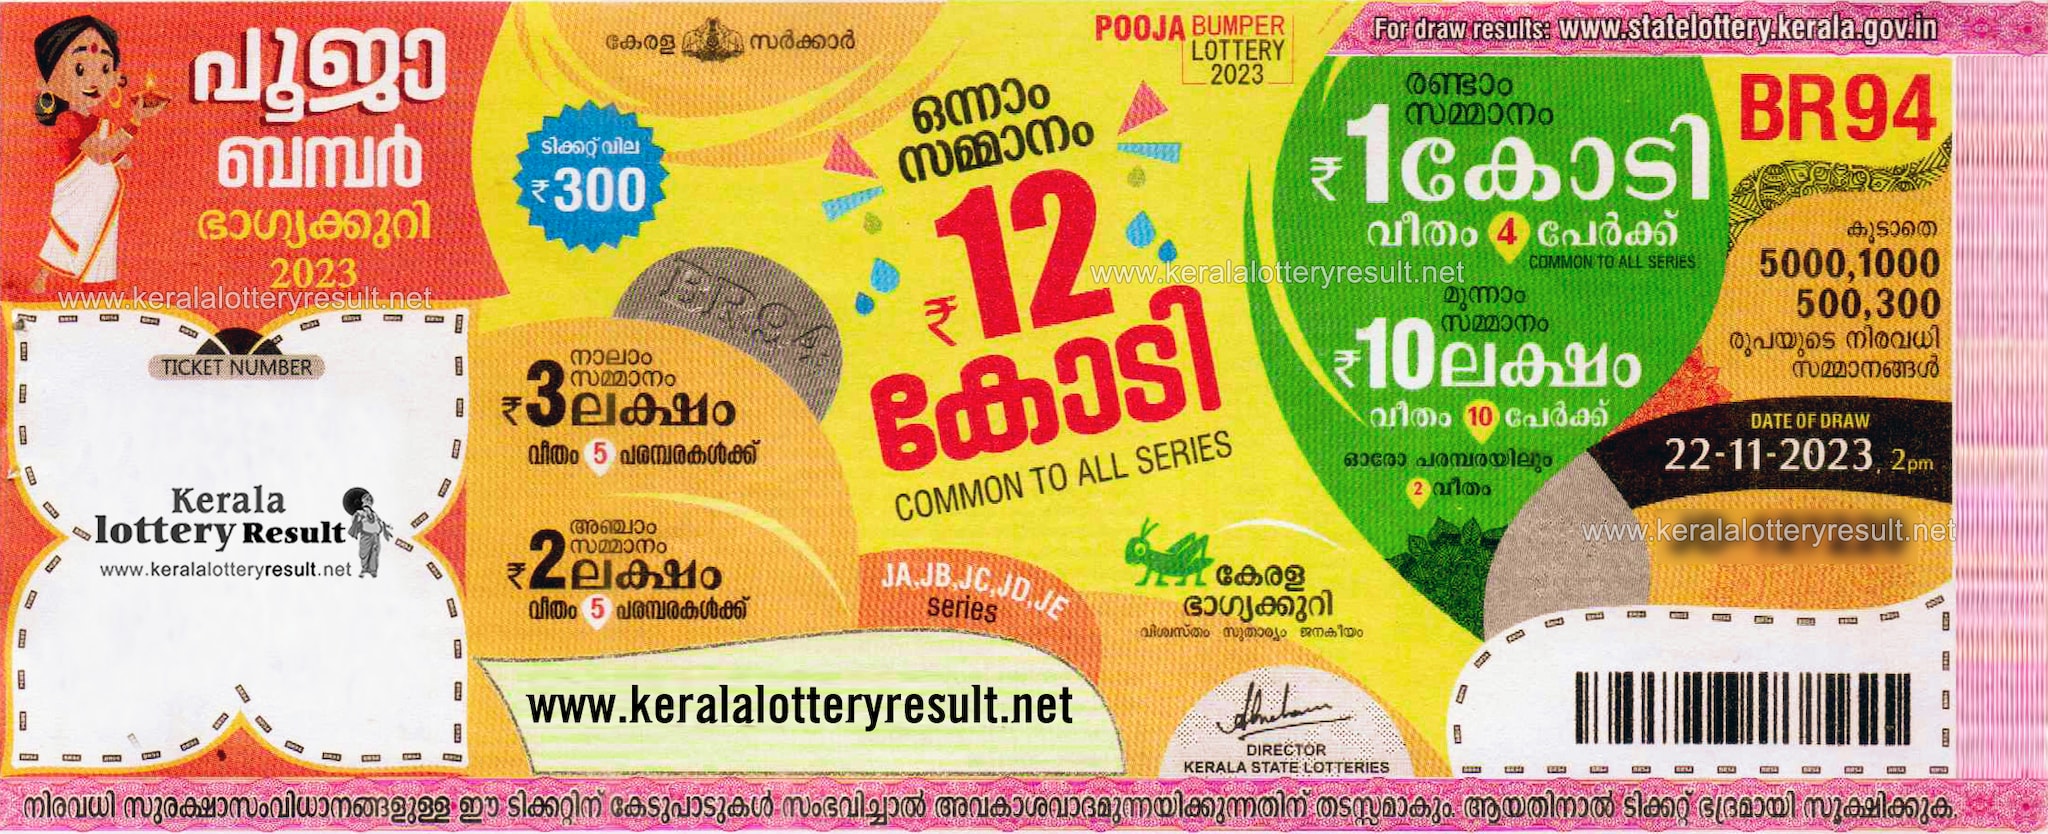 Kerala Lottery Result Today Declared Live Updates: State Lottery Results  NR-373 Winning Prize, Lucky Draw Number For Rs 70 Lakh